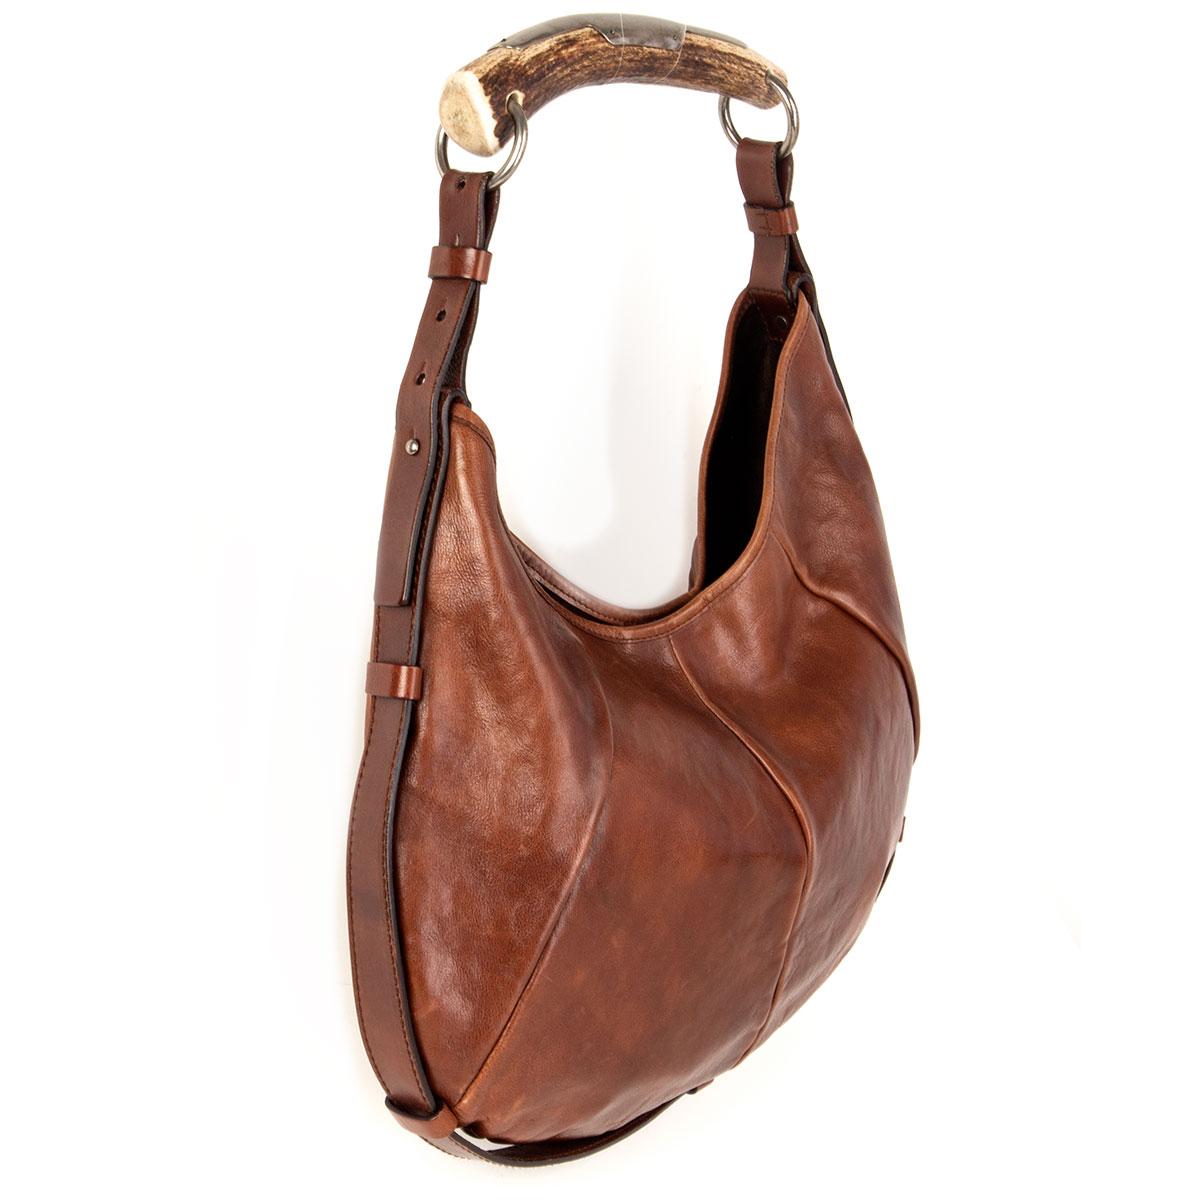 100% authentic Yves Saint Laurent Mombasa Medium shoulder bag in brown calfskin with horn handle featuring silver-tone hardware. Opens with a magnetic button and is lined in espresso brown suede with one zipper pocket against the back. Has been